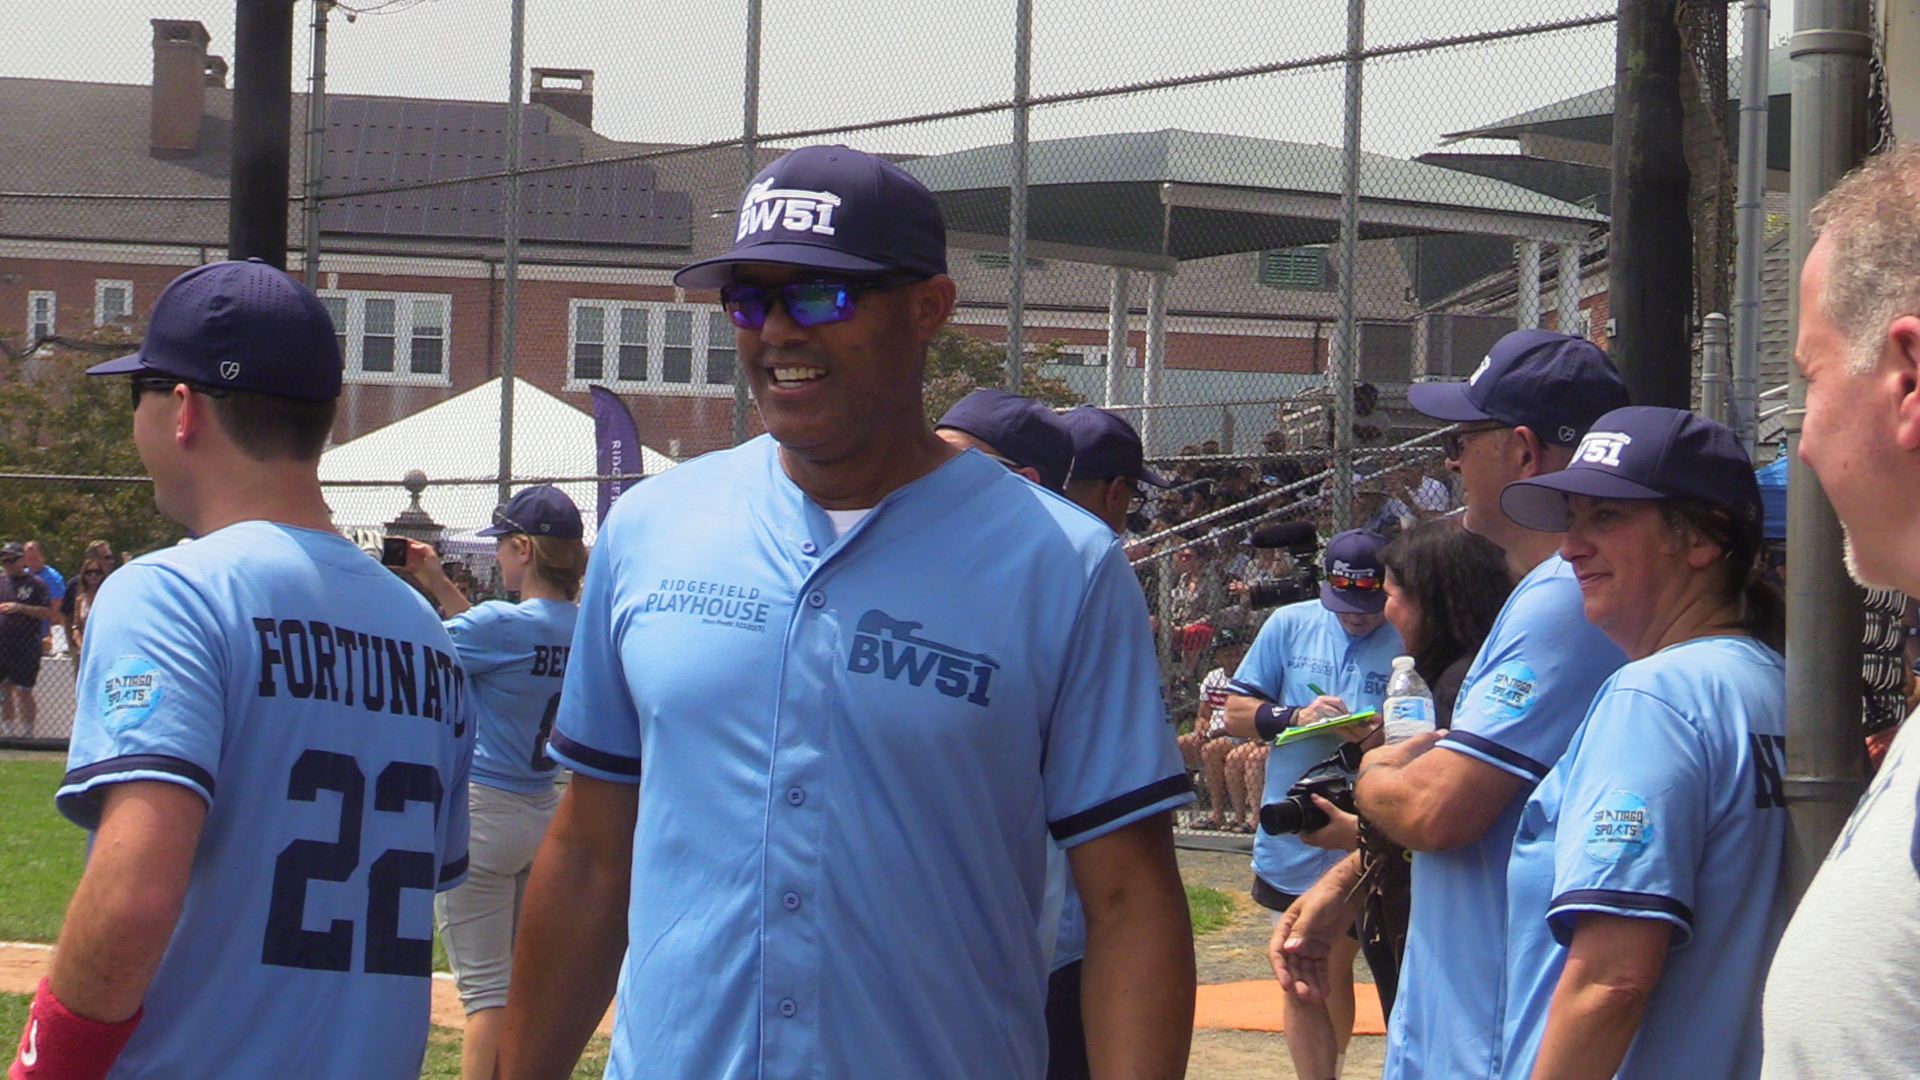 Bernie Williams celebrates being back at Old-Timers' Day 